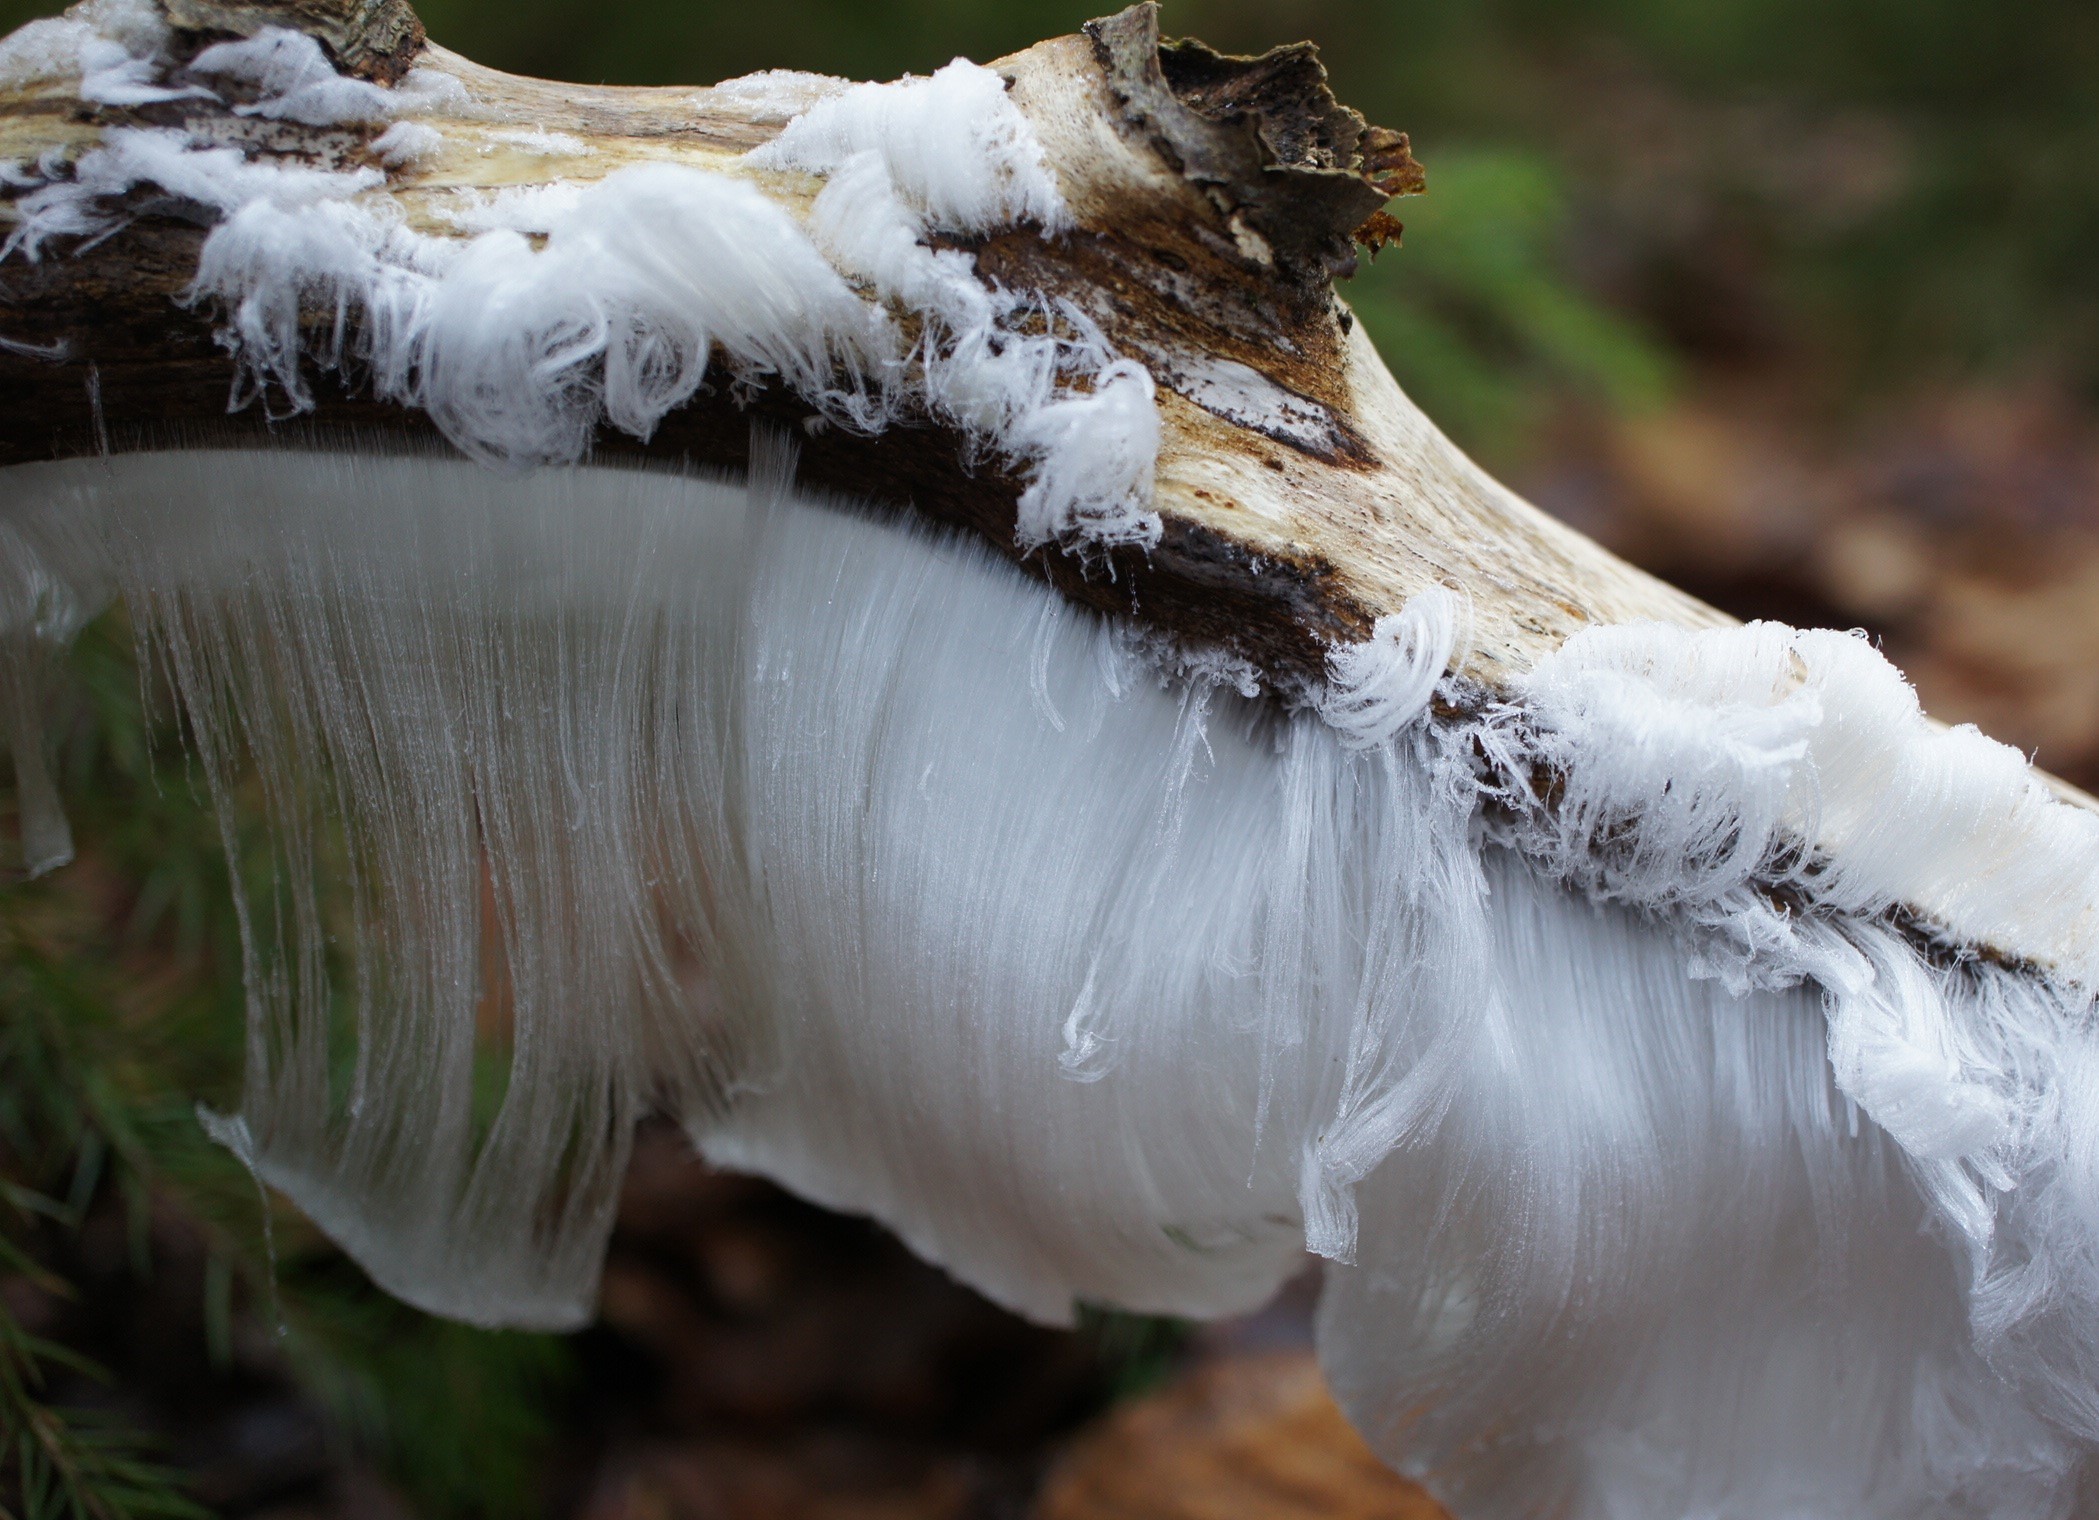 You Can Thank A Fungus For These Crazy Hair Ice Sculptures